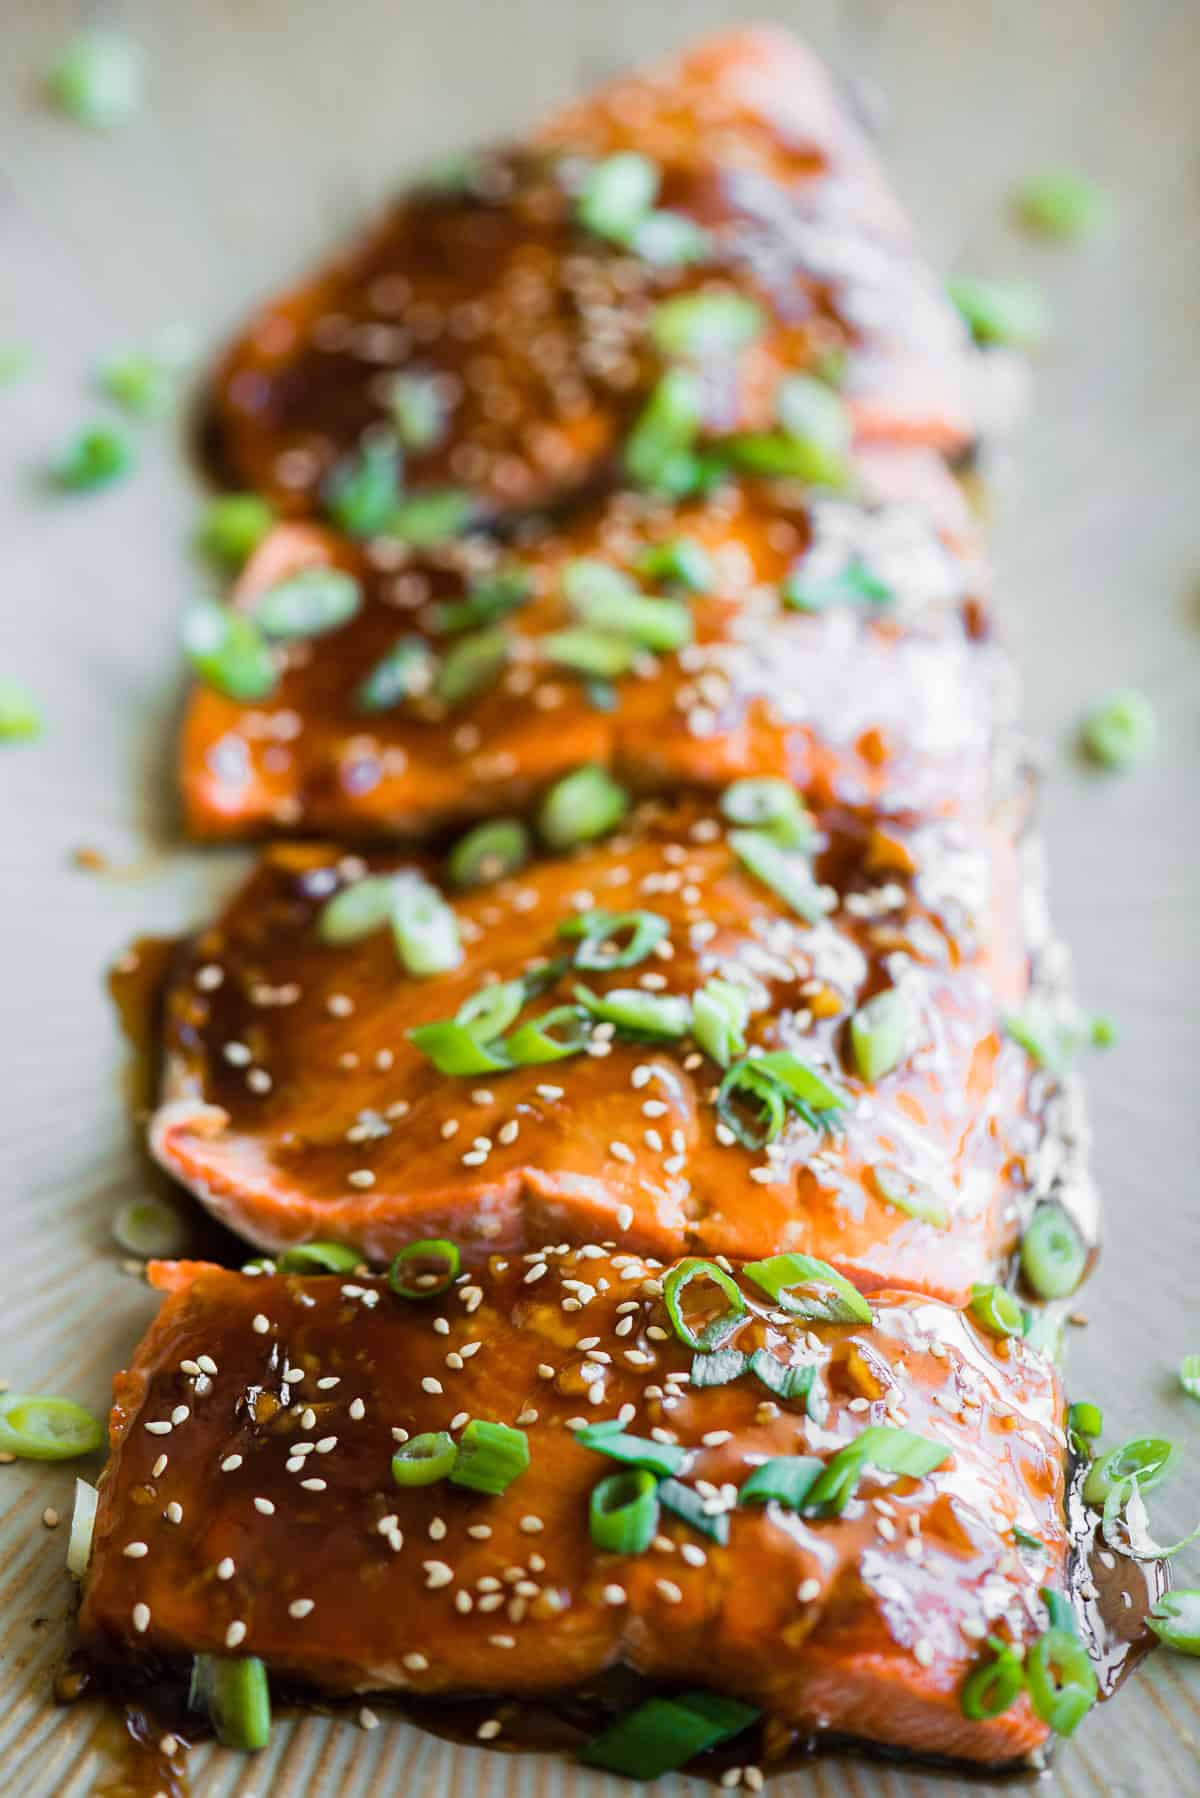 whole fresh salmon filet baked with teriyaki sauce and garnished with green onions and sesame seeds.